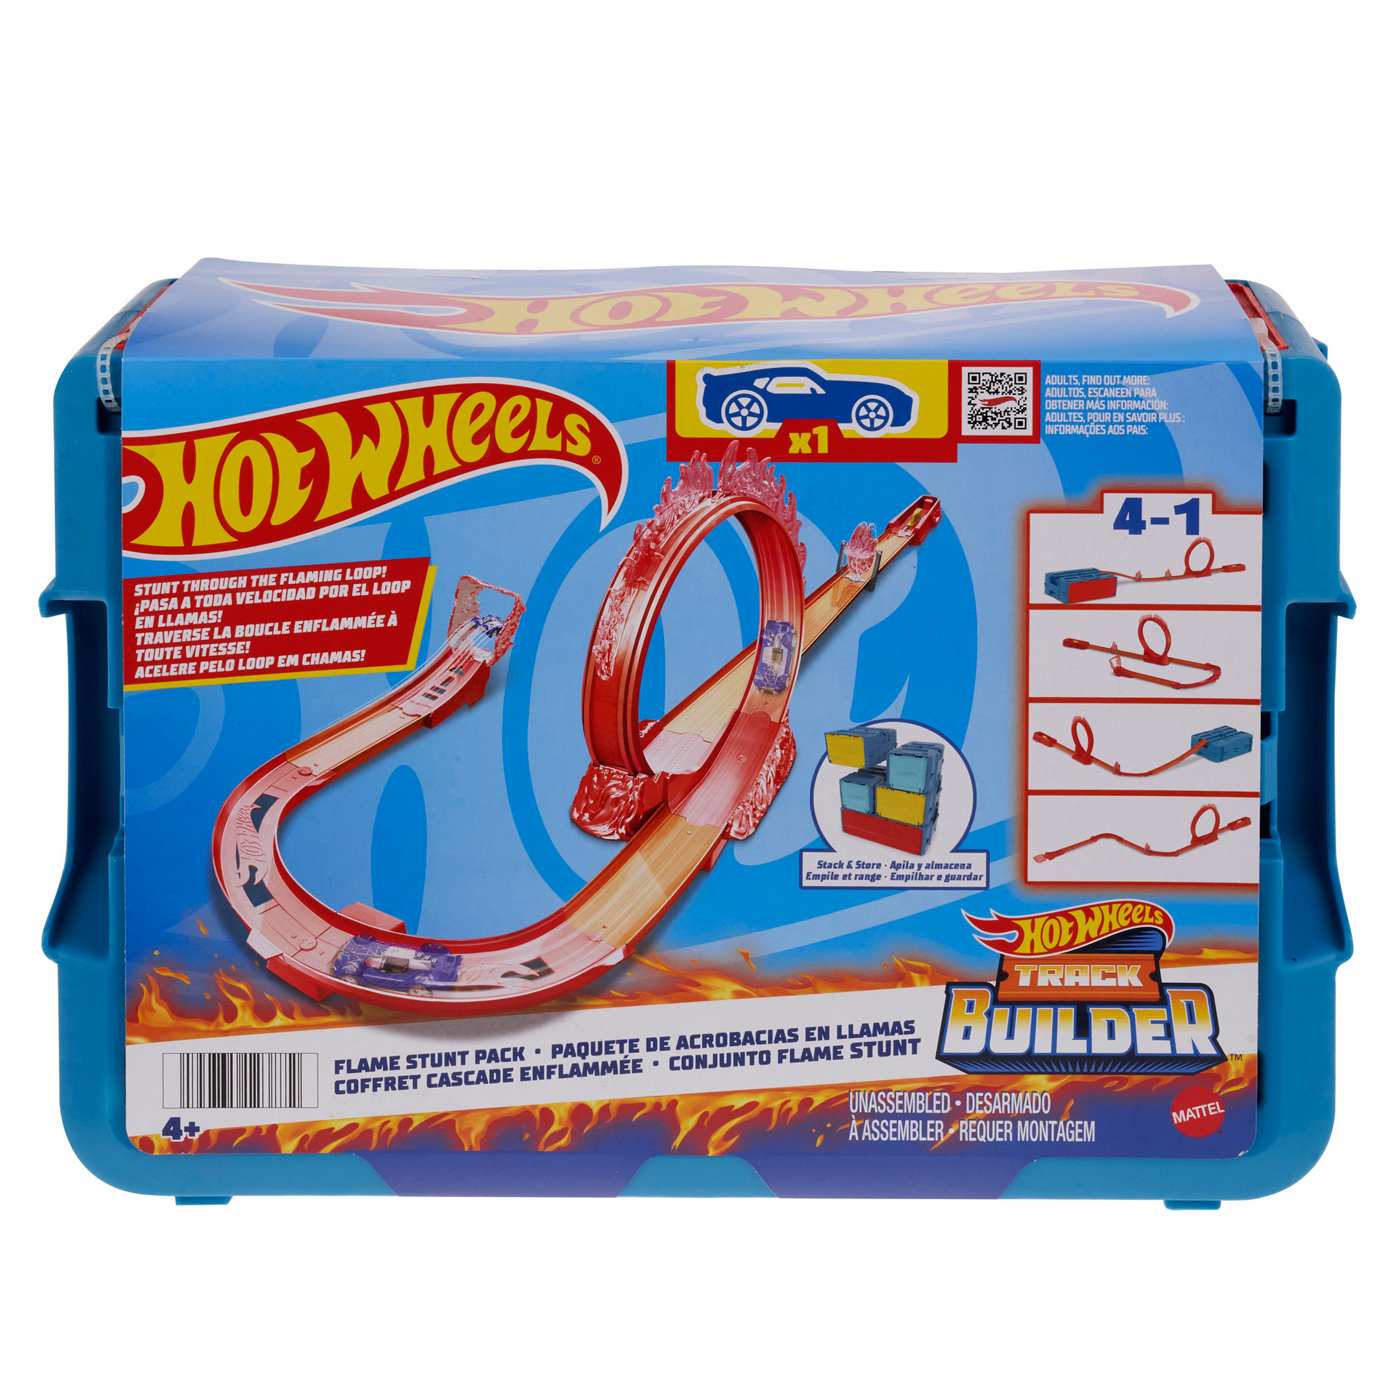 Hot Wheels Track Builder Flame Stunt Pack Playset; image 1 of 2